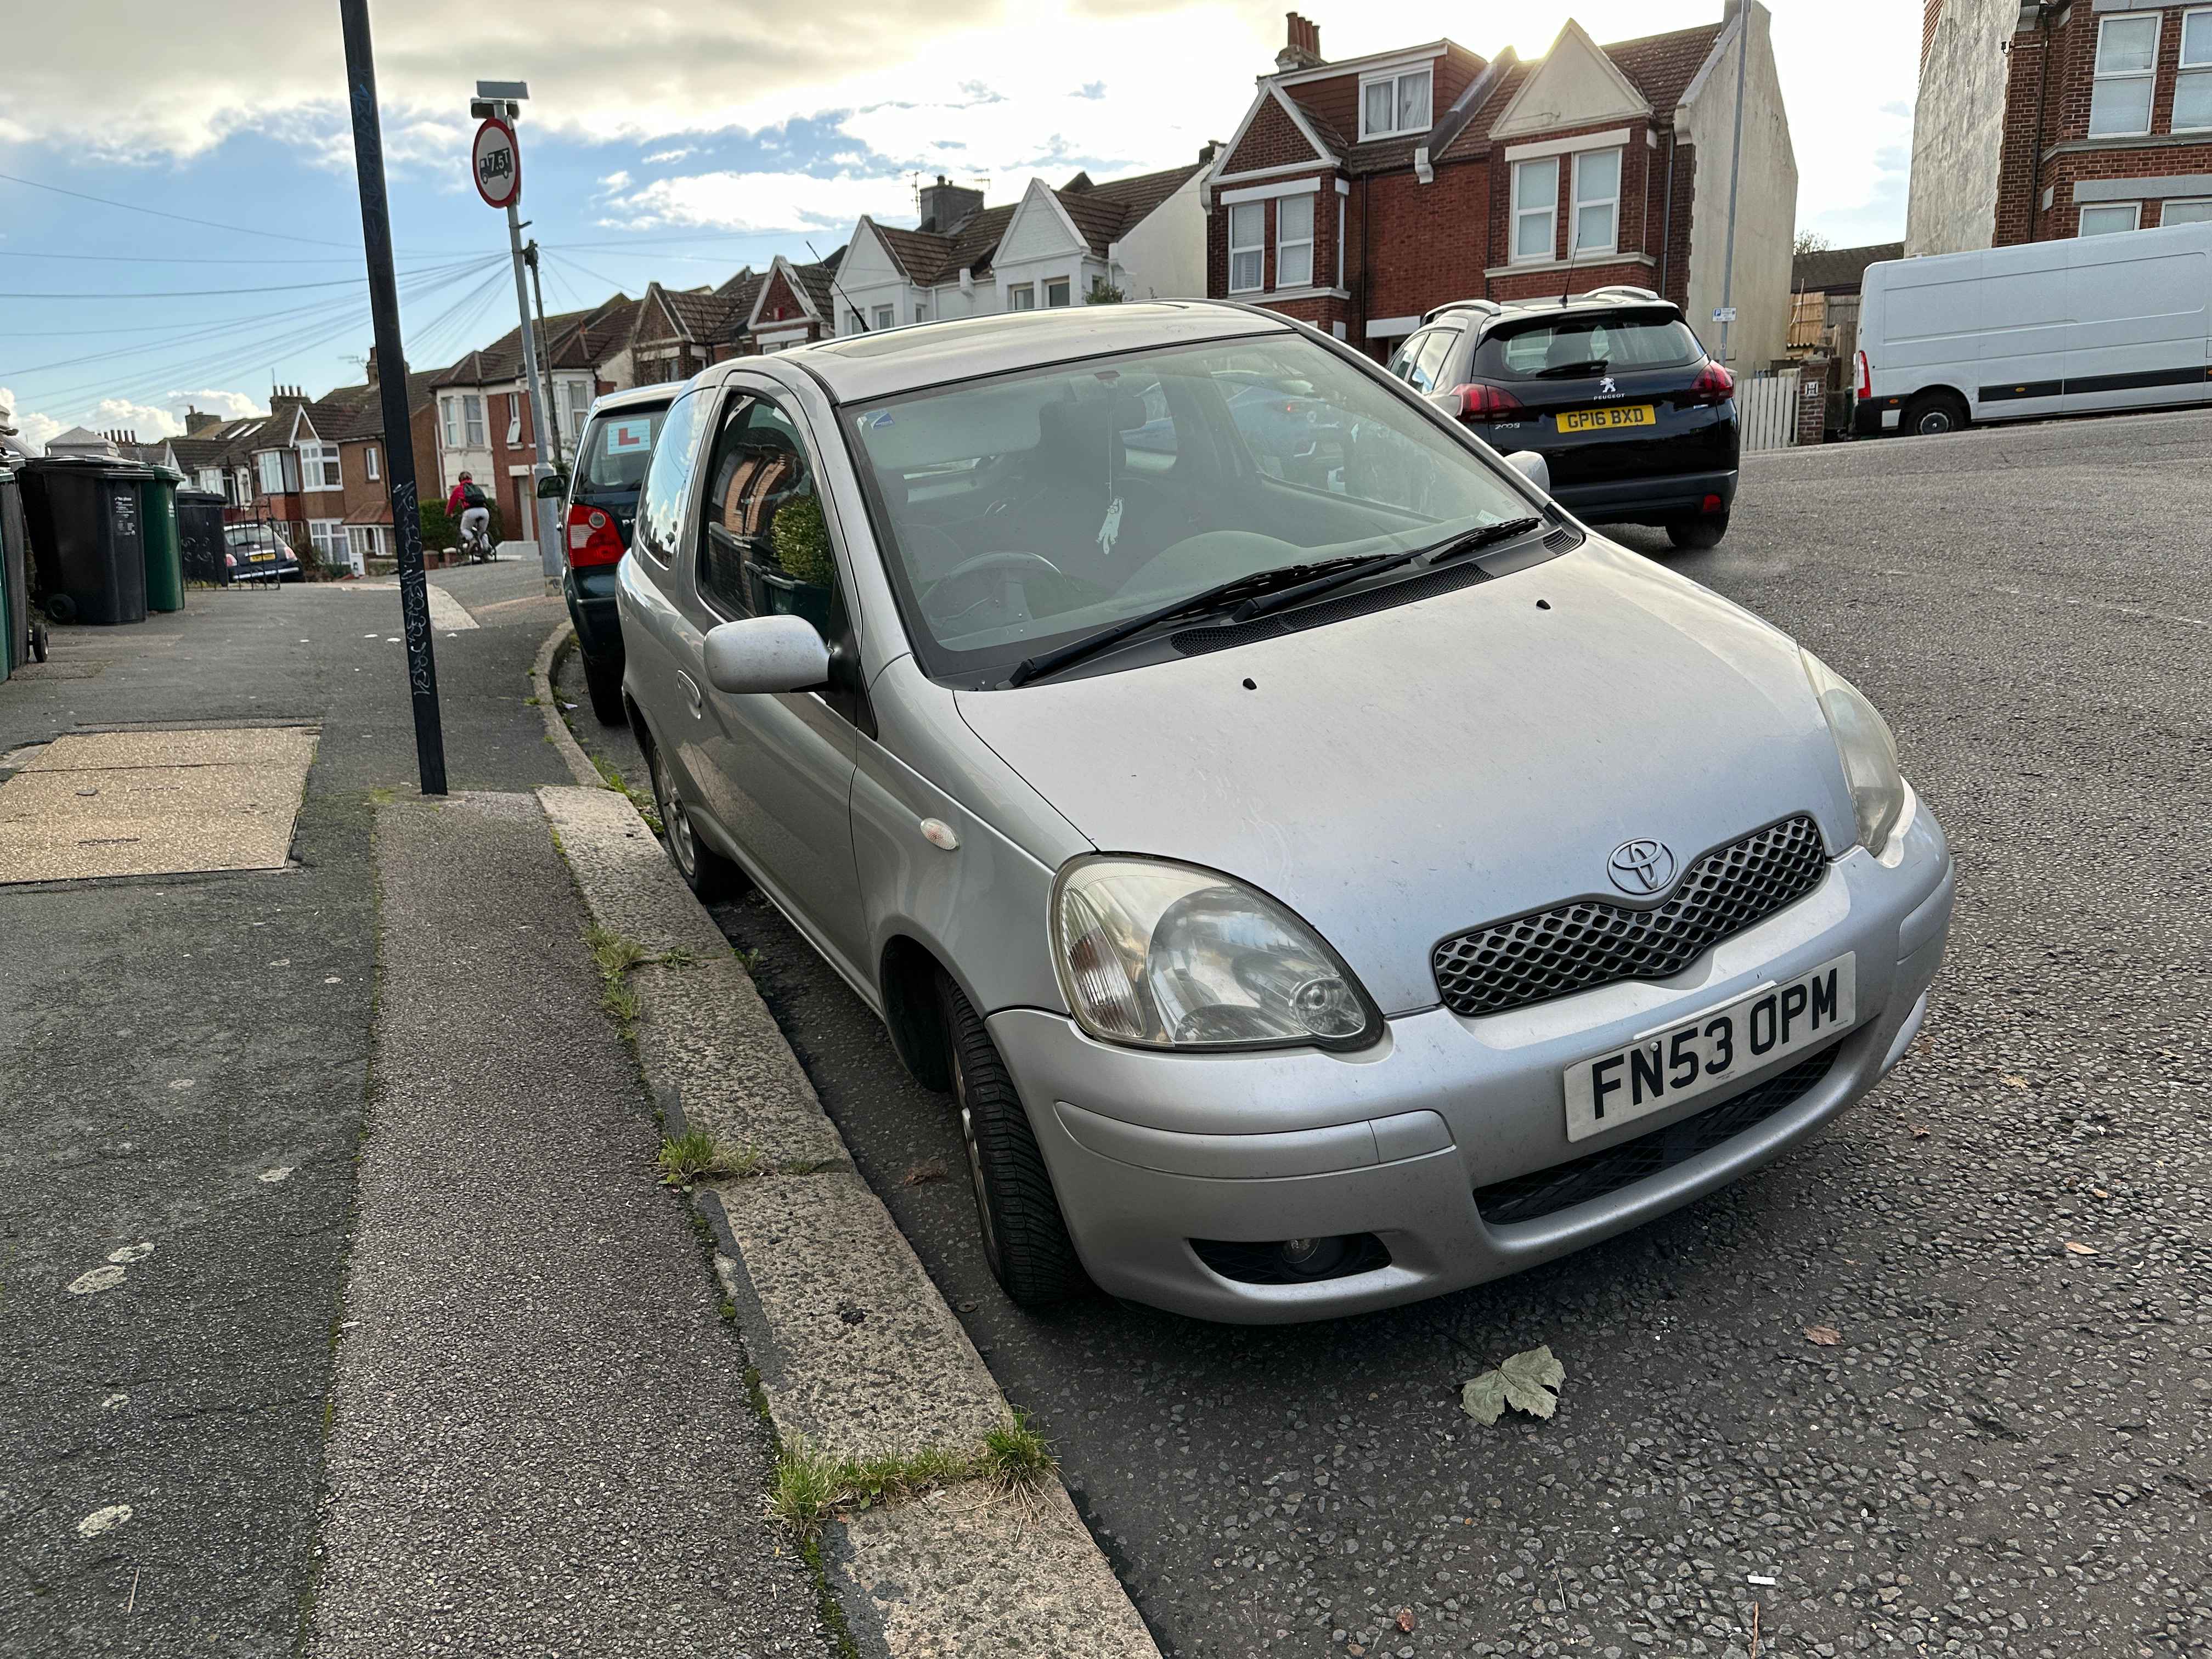 Photograph of FN53 OPM - a Silver Toyota Yaris parked in Hollingdean by a non-resident. The first of five photographs supplied by the residents of Hollingdean.